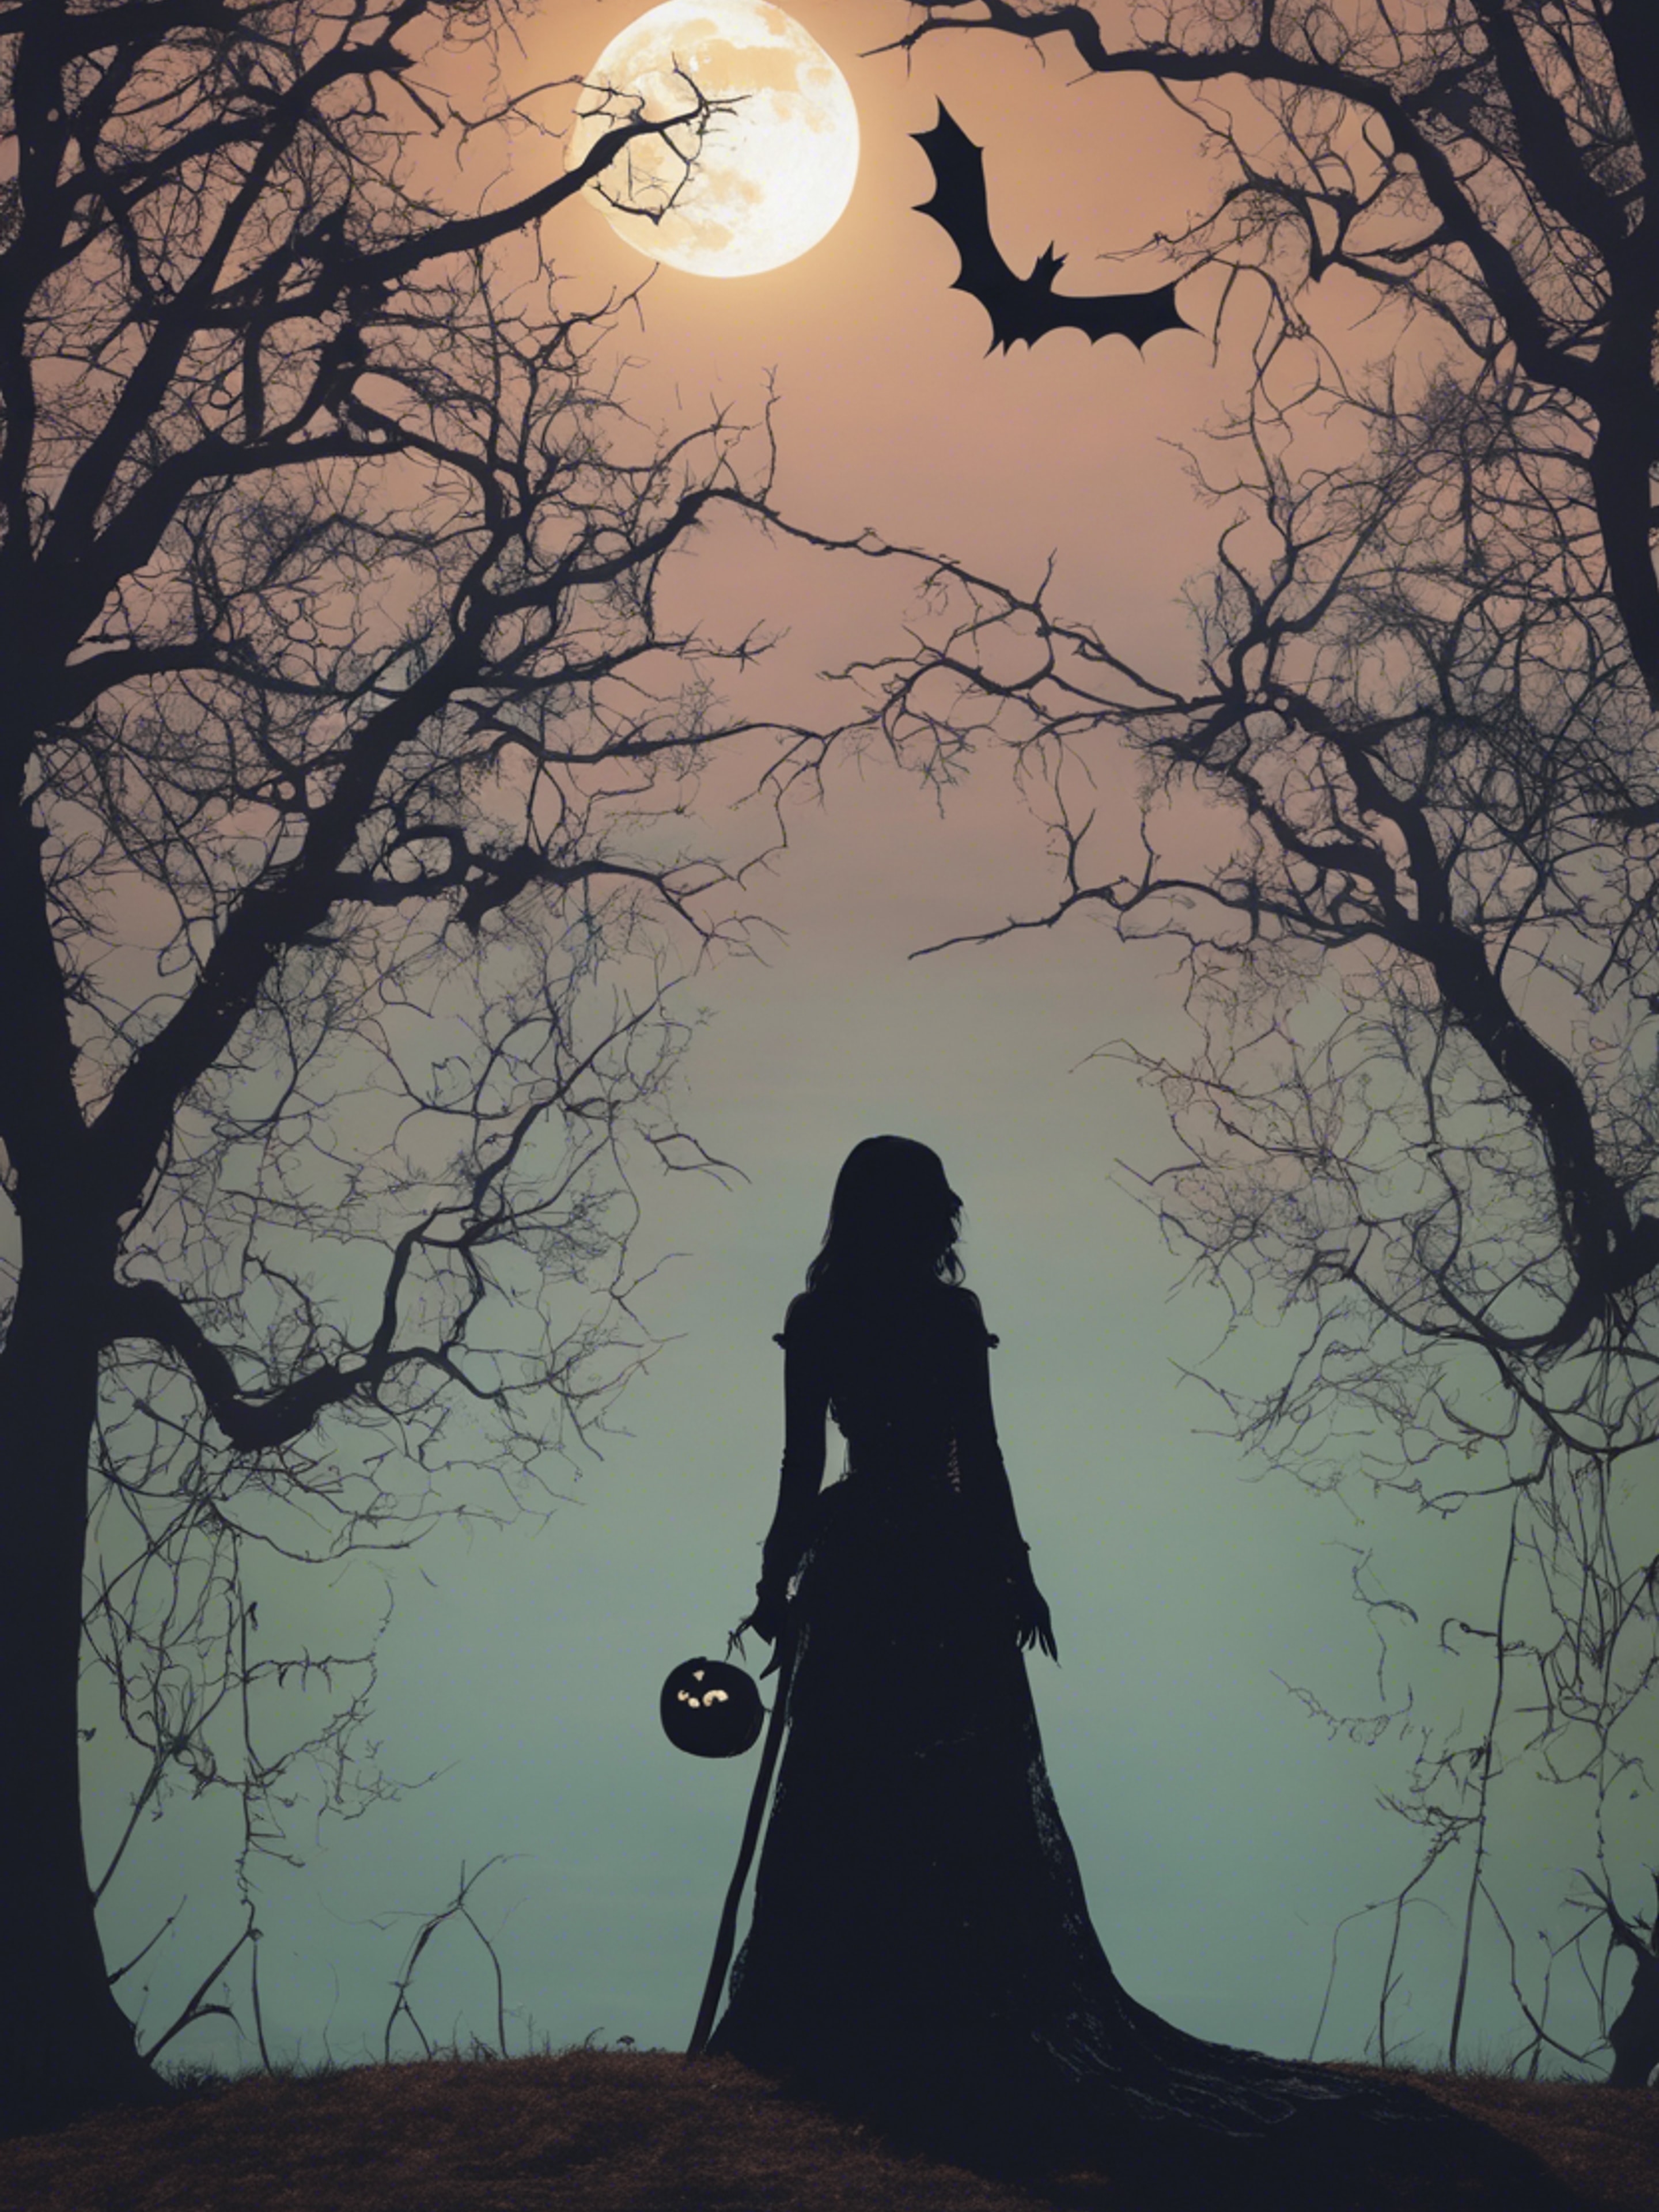 A pastel gothic art piece featuring a halloween-inspired silhouette against a full moon. Hintergrund[0c56d77b25284c4fbd1c]